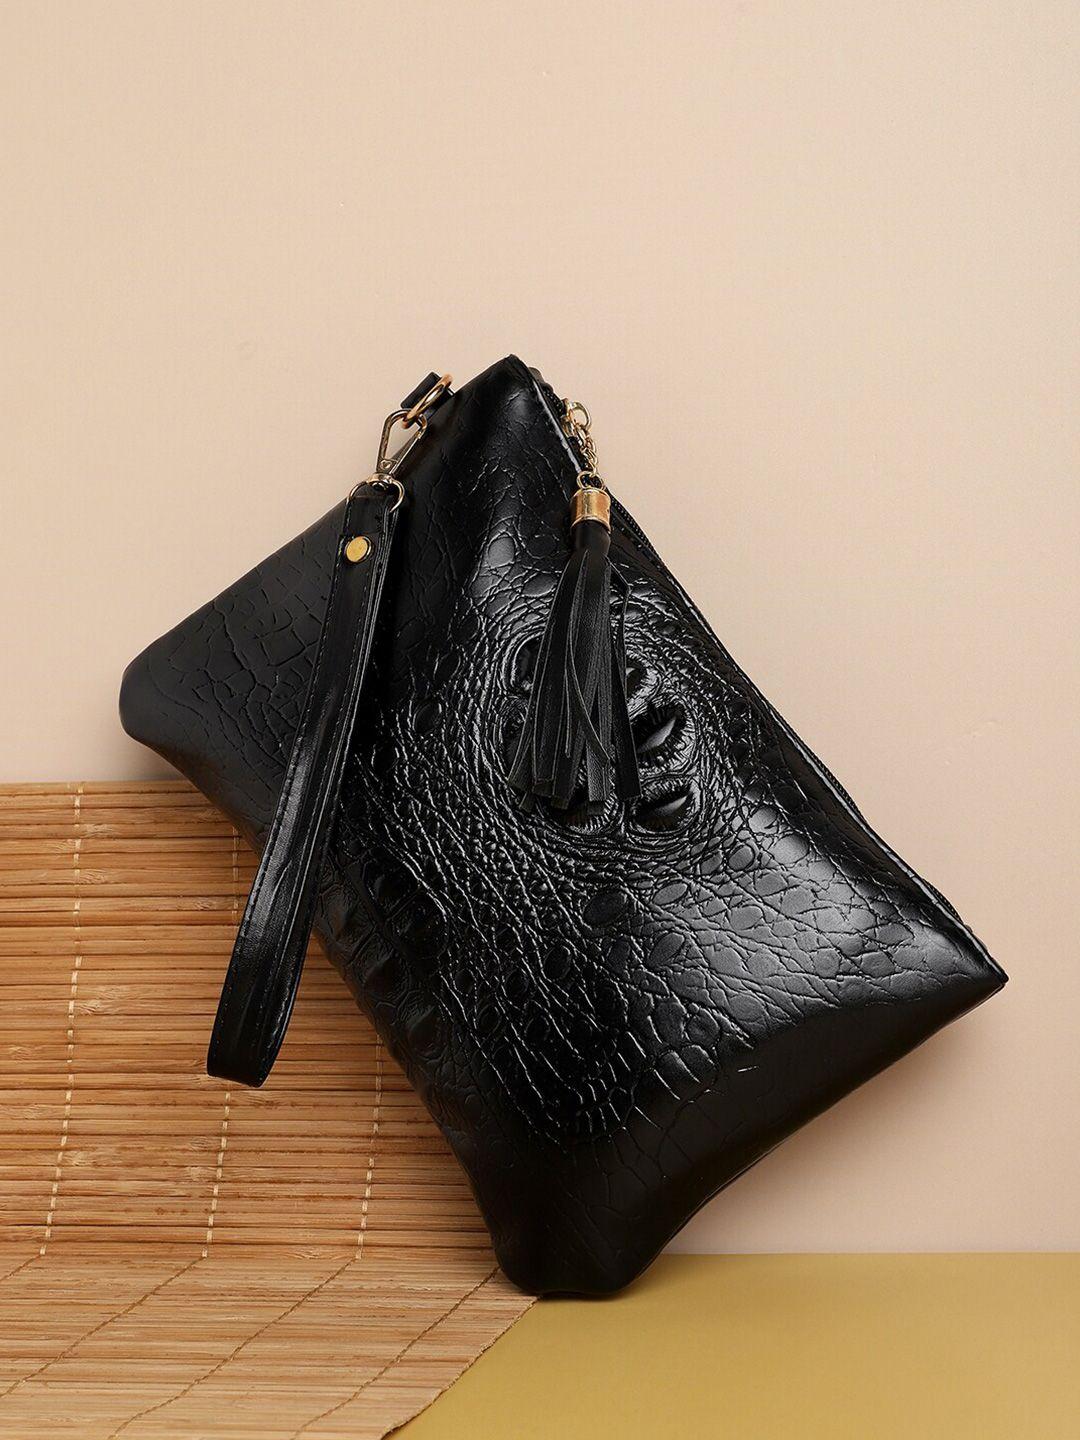 haute sauce by campus sutra textured vegan leather purse clutch